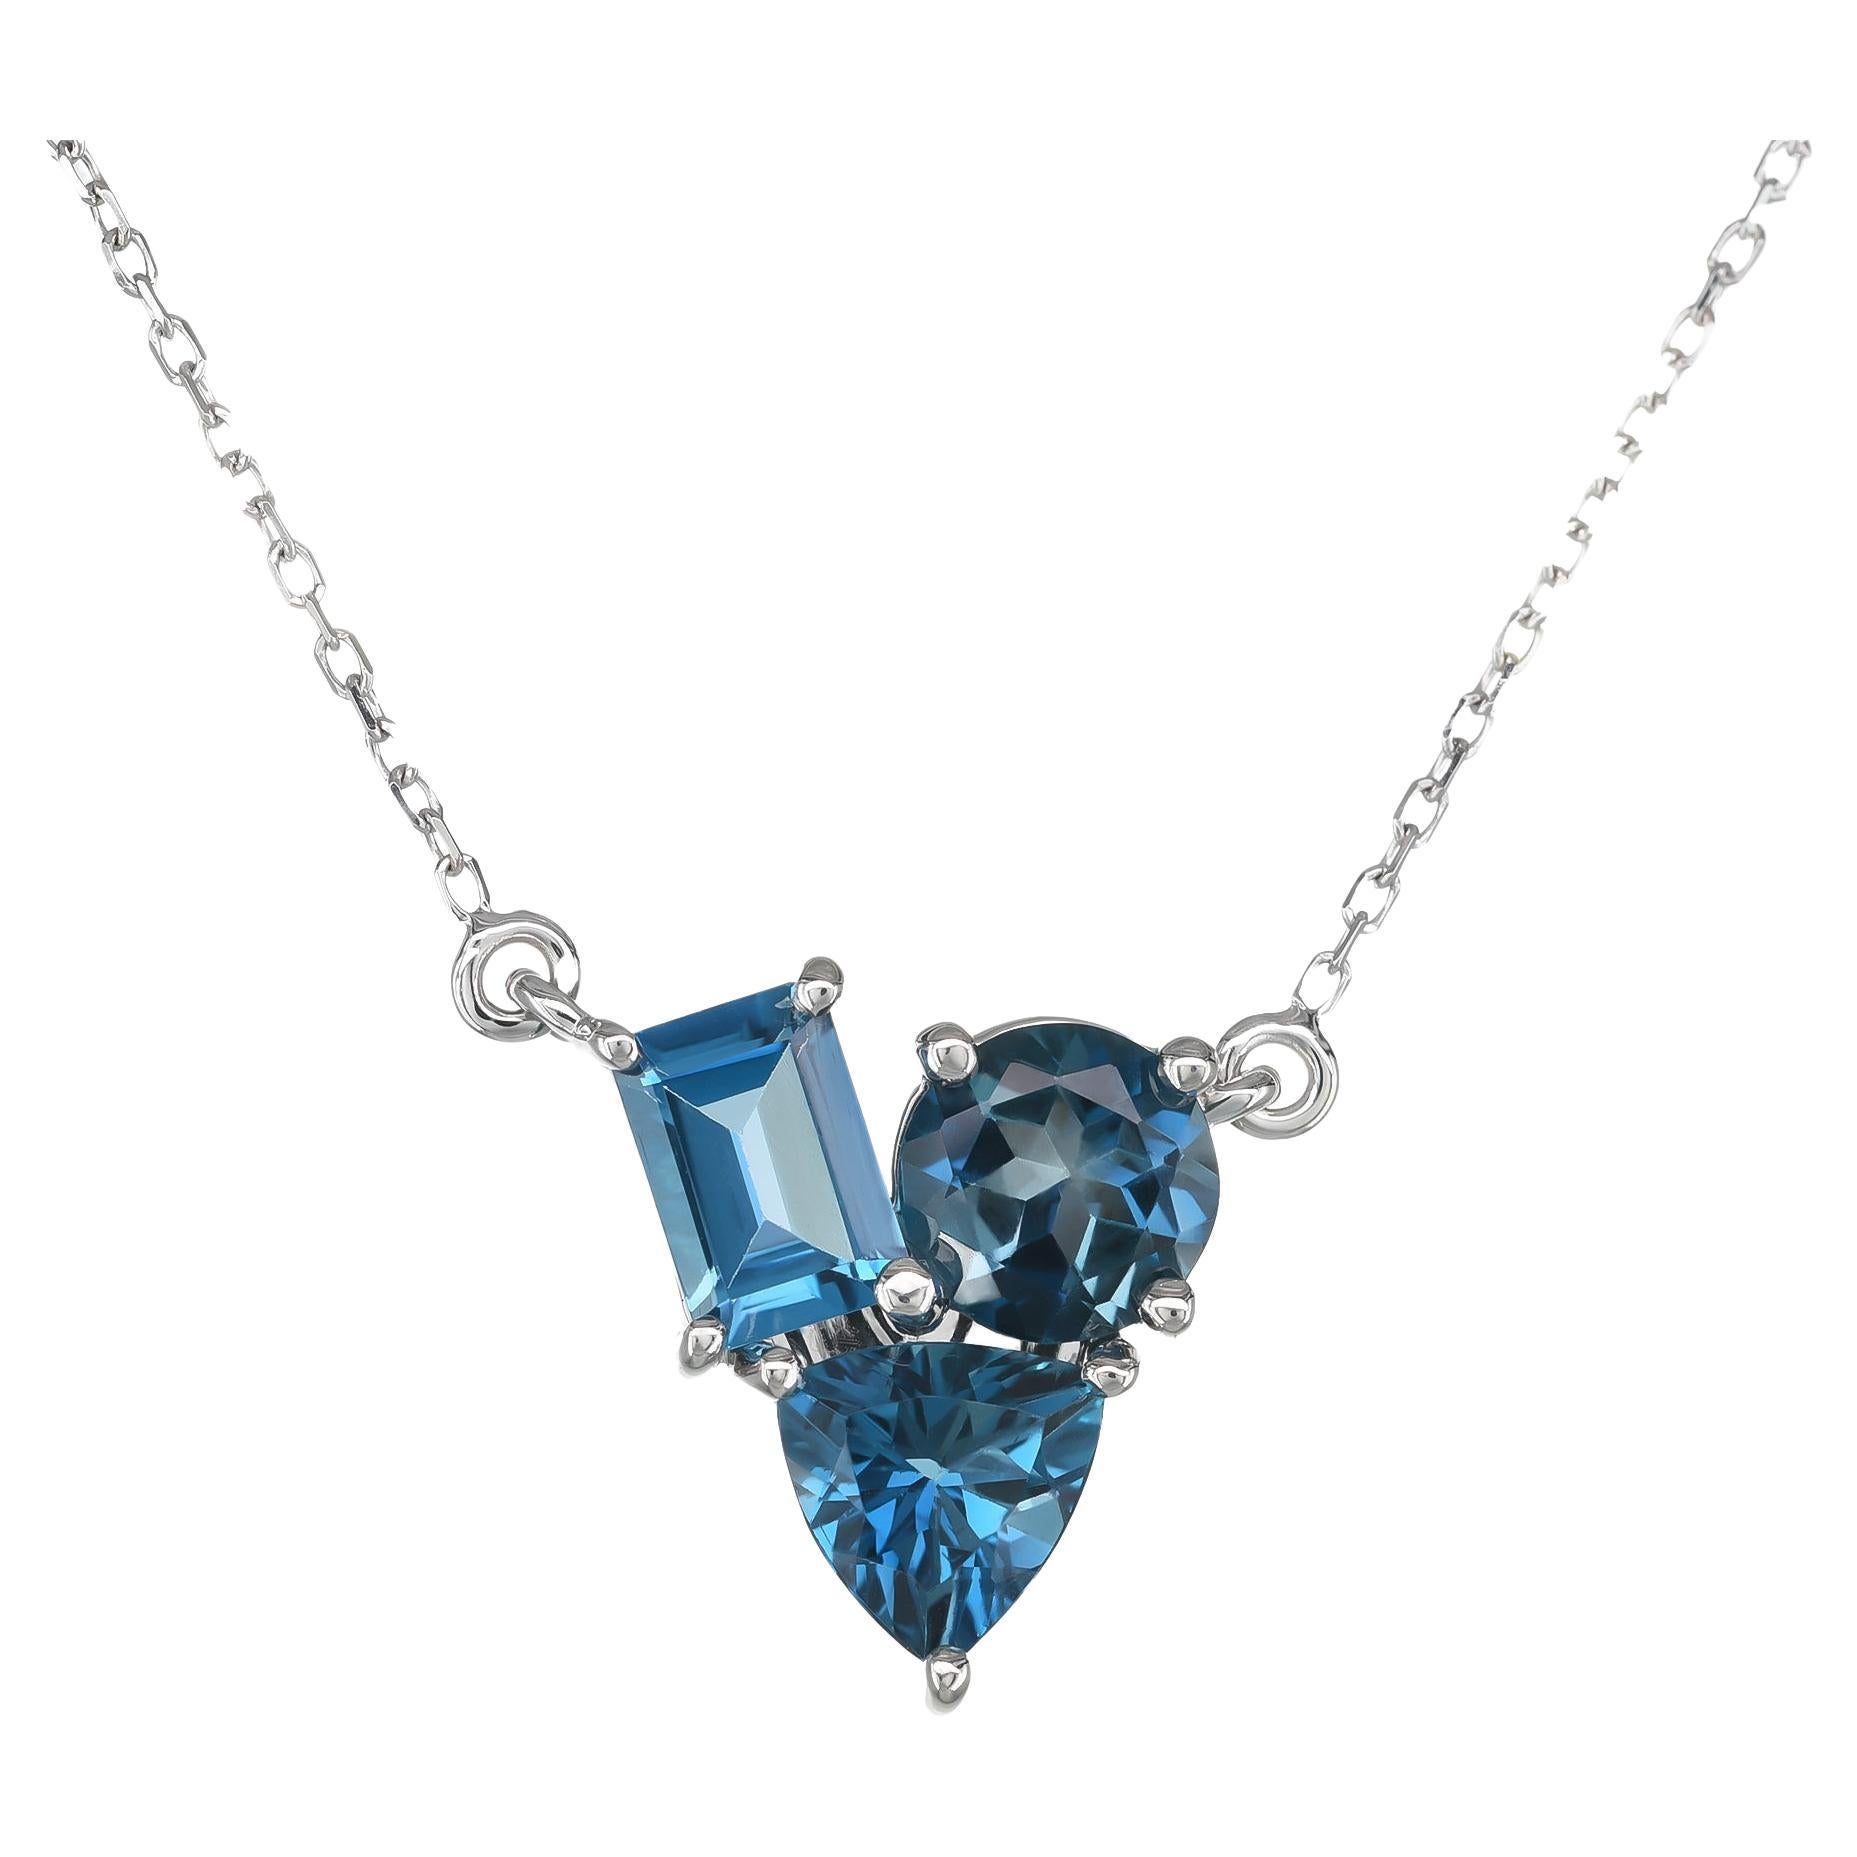 Pendant with 2.32 carats Blue Topaz set in 14K White Gold For Sale